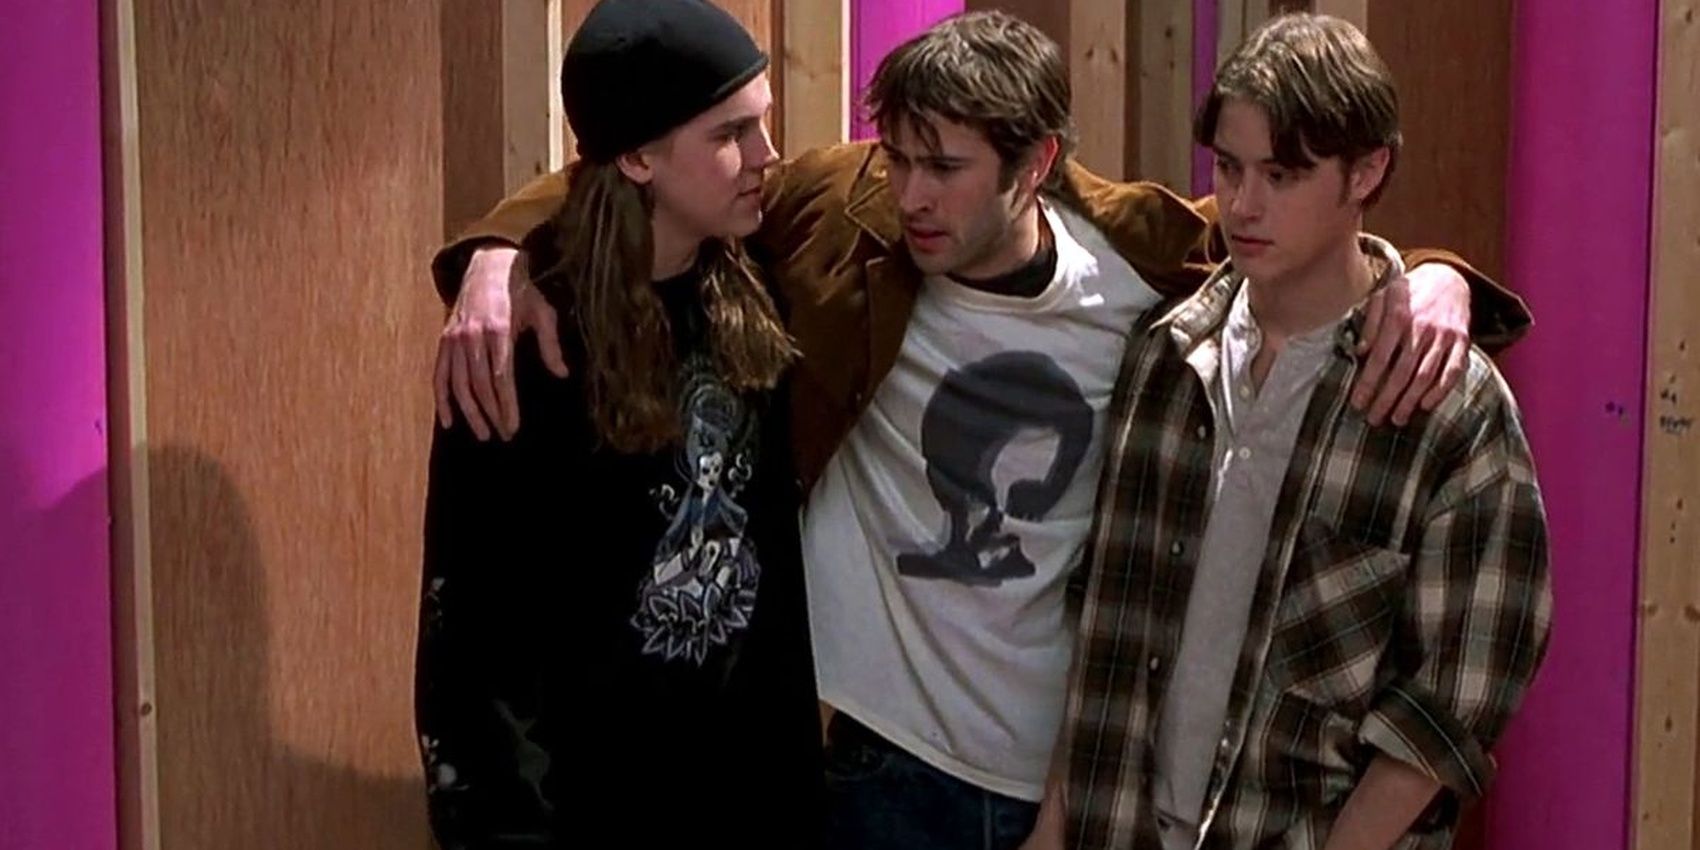 10 Most Underrated Teen Movies Of The 90s